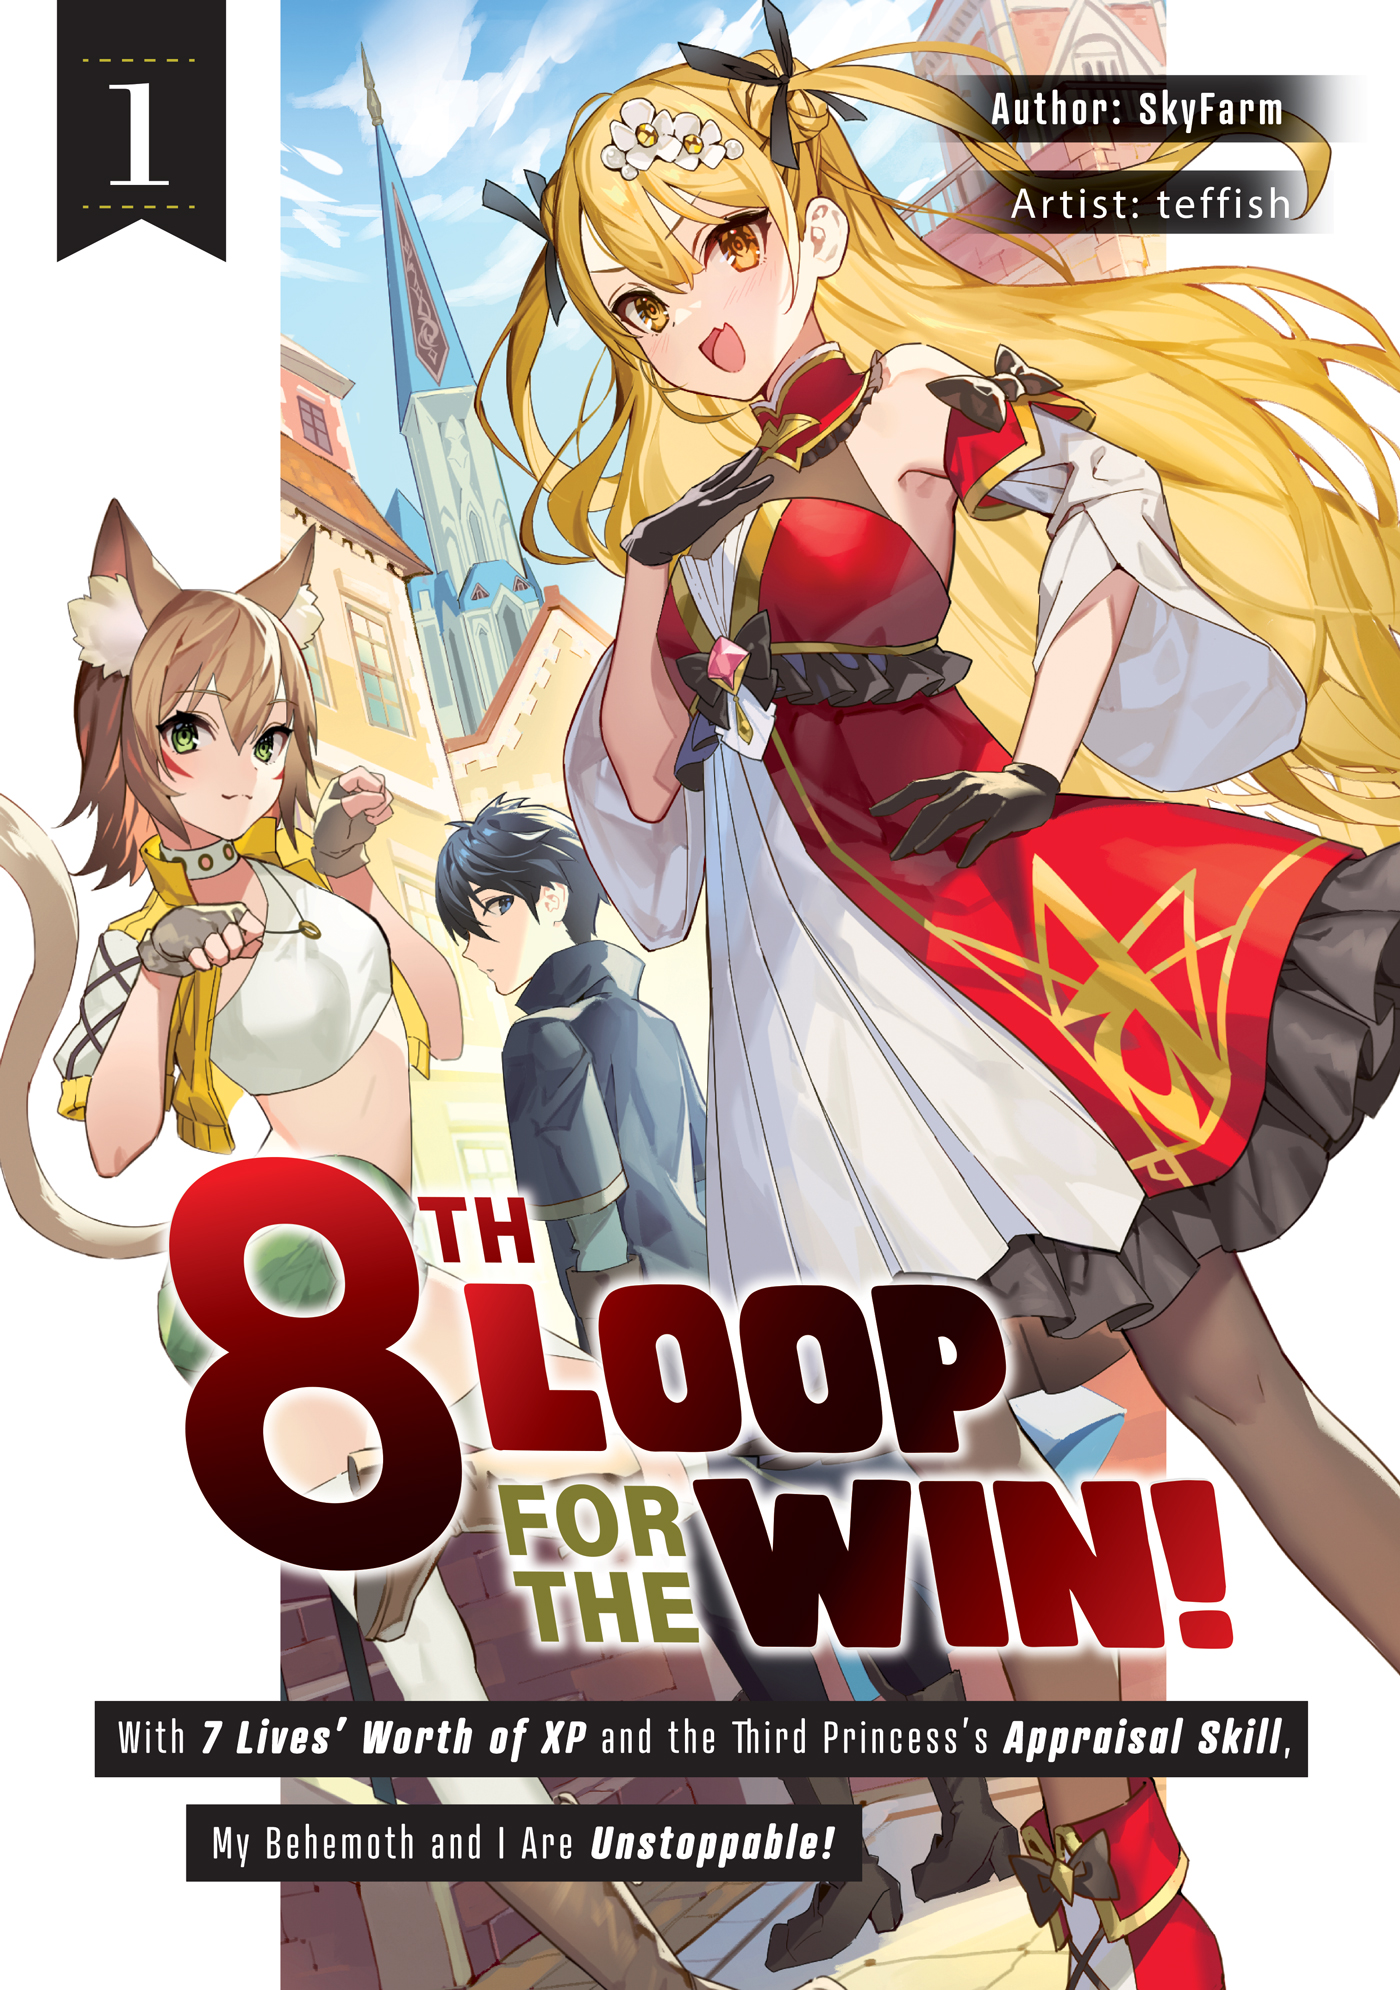 8th Loop for the Win! With Seven Lives’ Worth of XP and the Third Princess’s Appraisal Skill, My Behemoth and I Are Unstoppable by SkyFarm (Story), teffish (Illustrations)